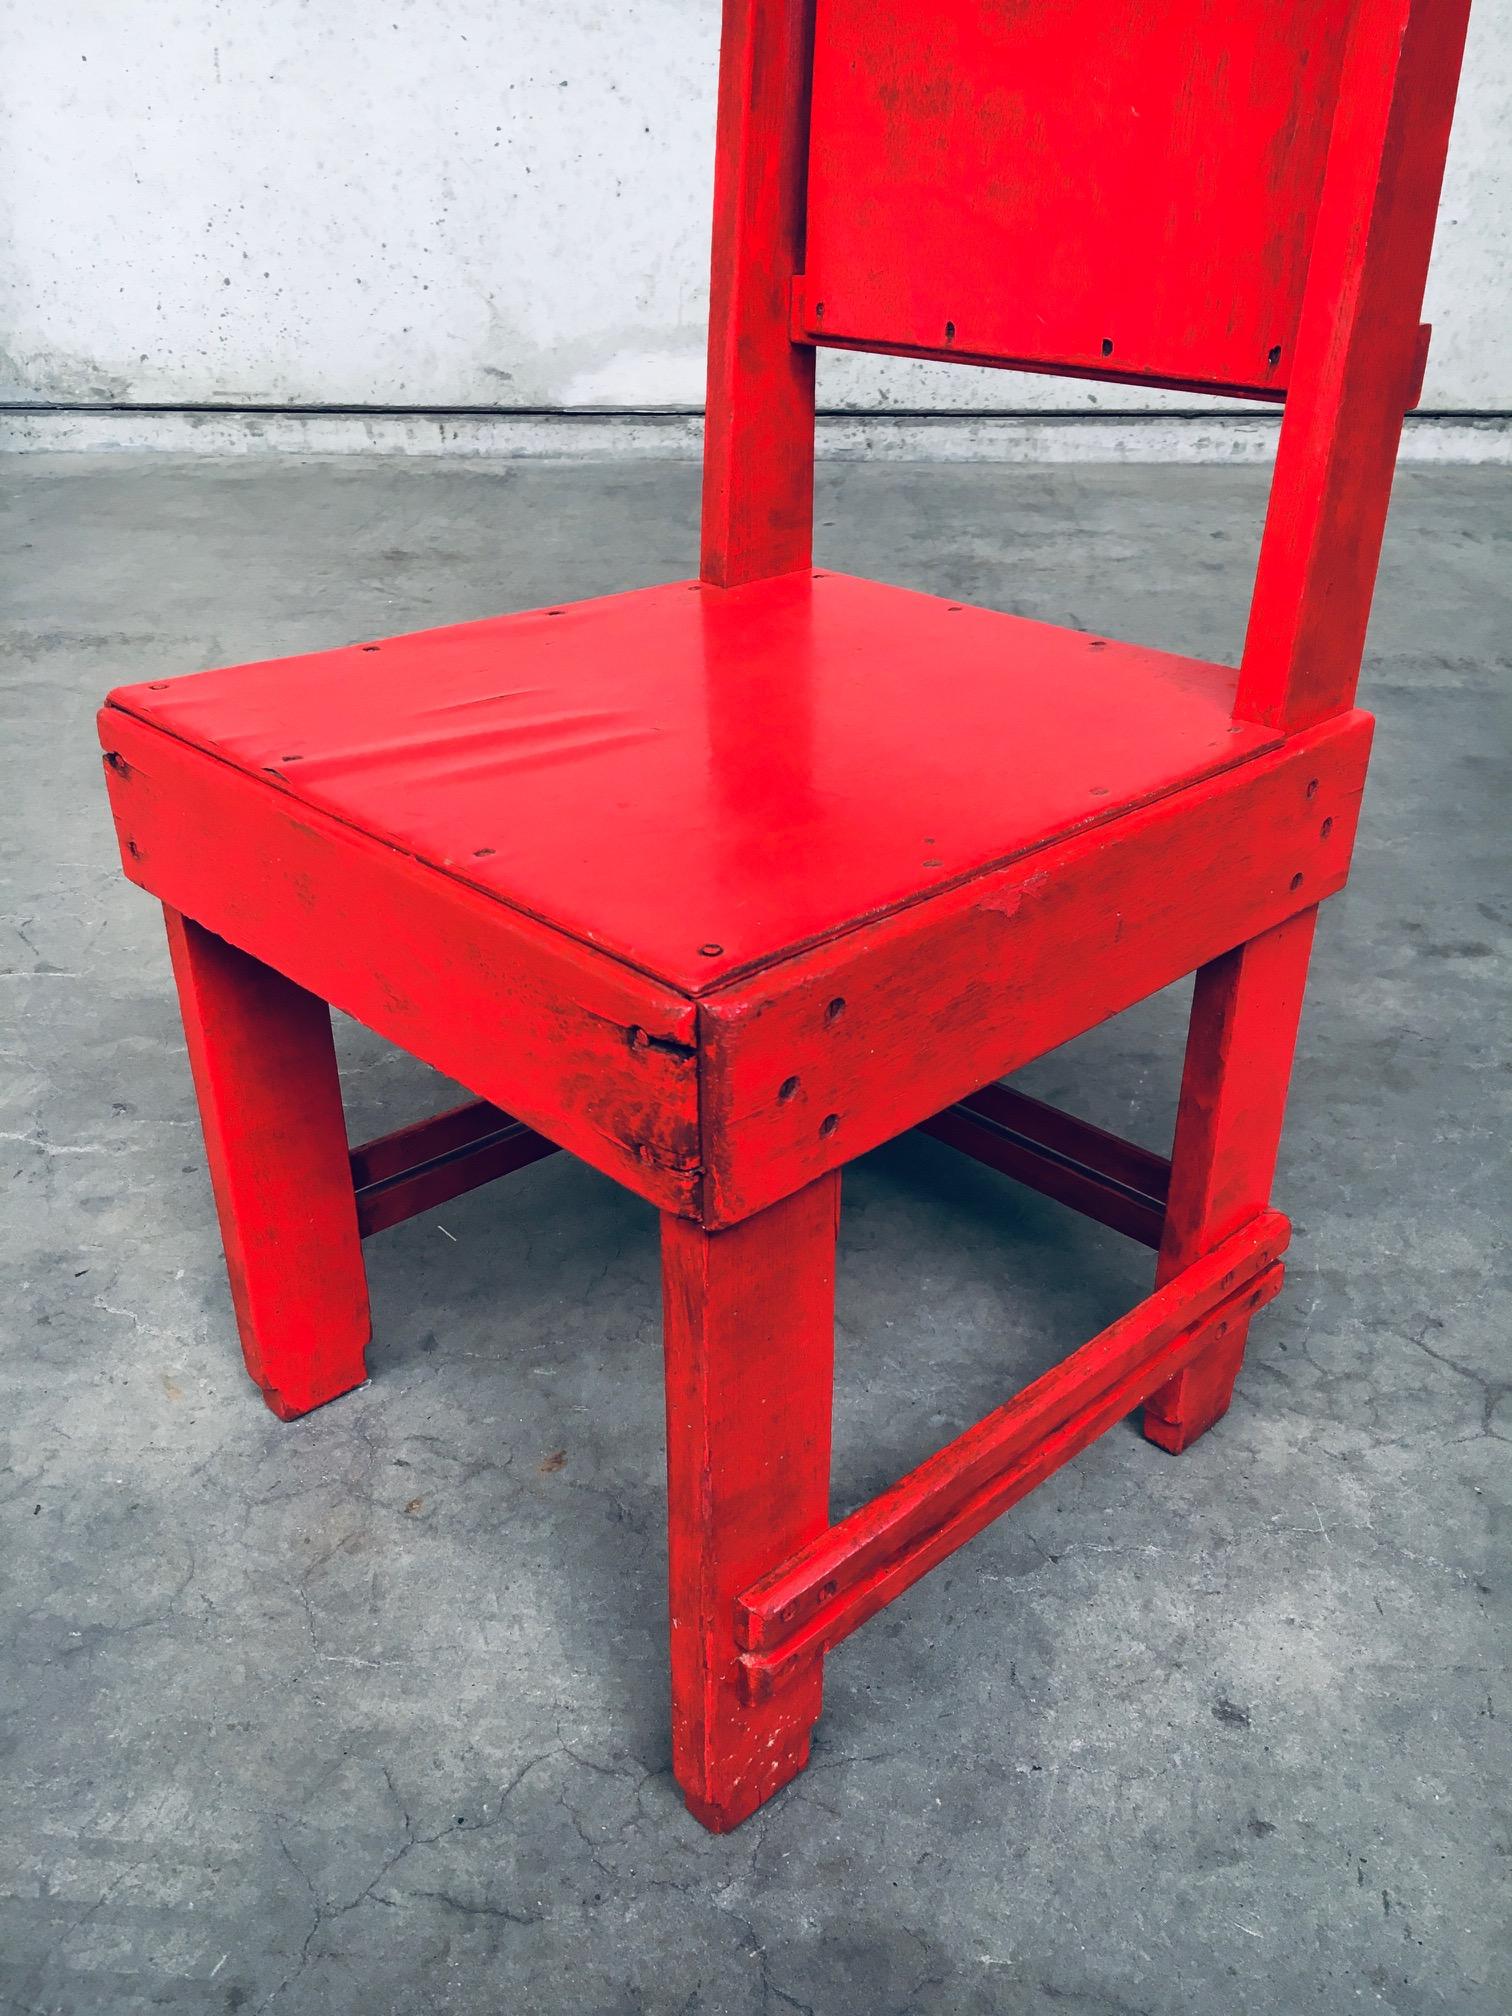 De Stijl Movement Design Red Chair Attributed to Jan Wils, 1920's Netherlands For Sale 4